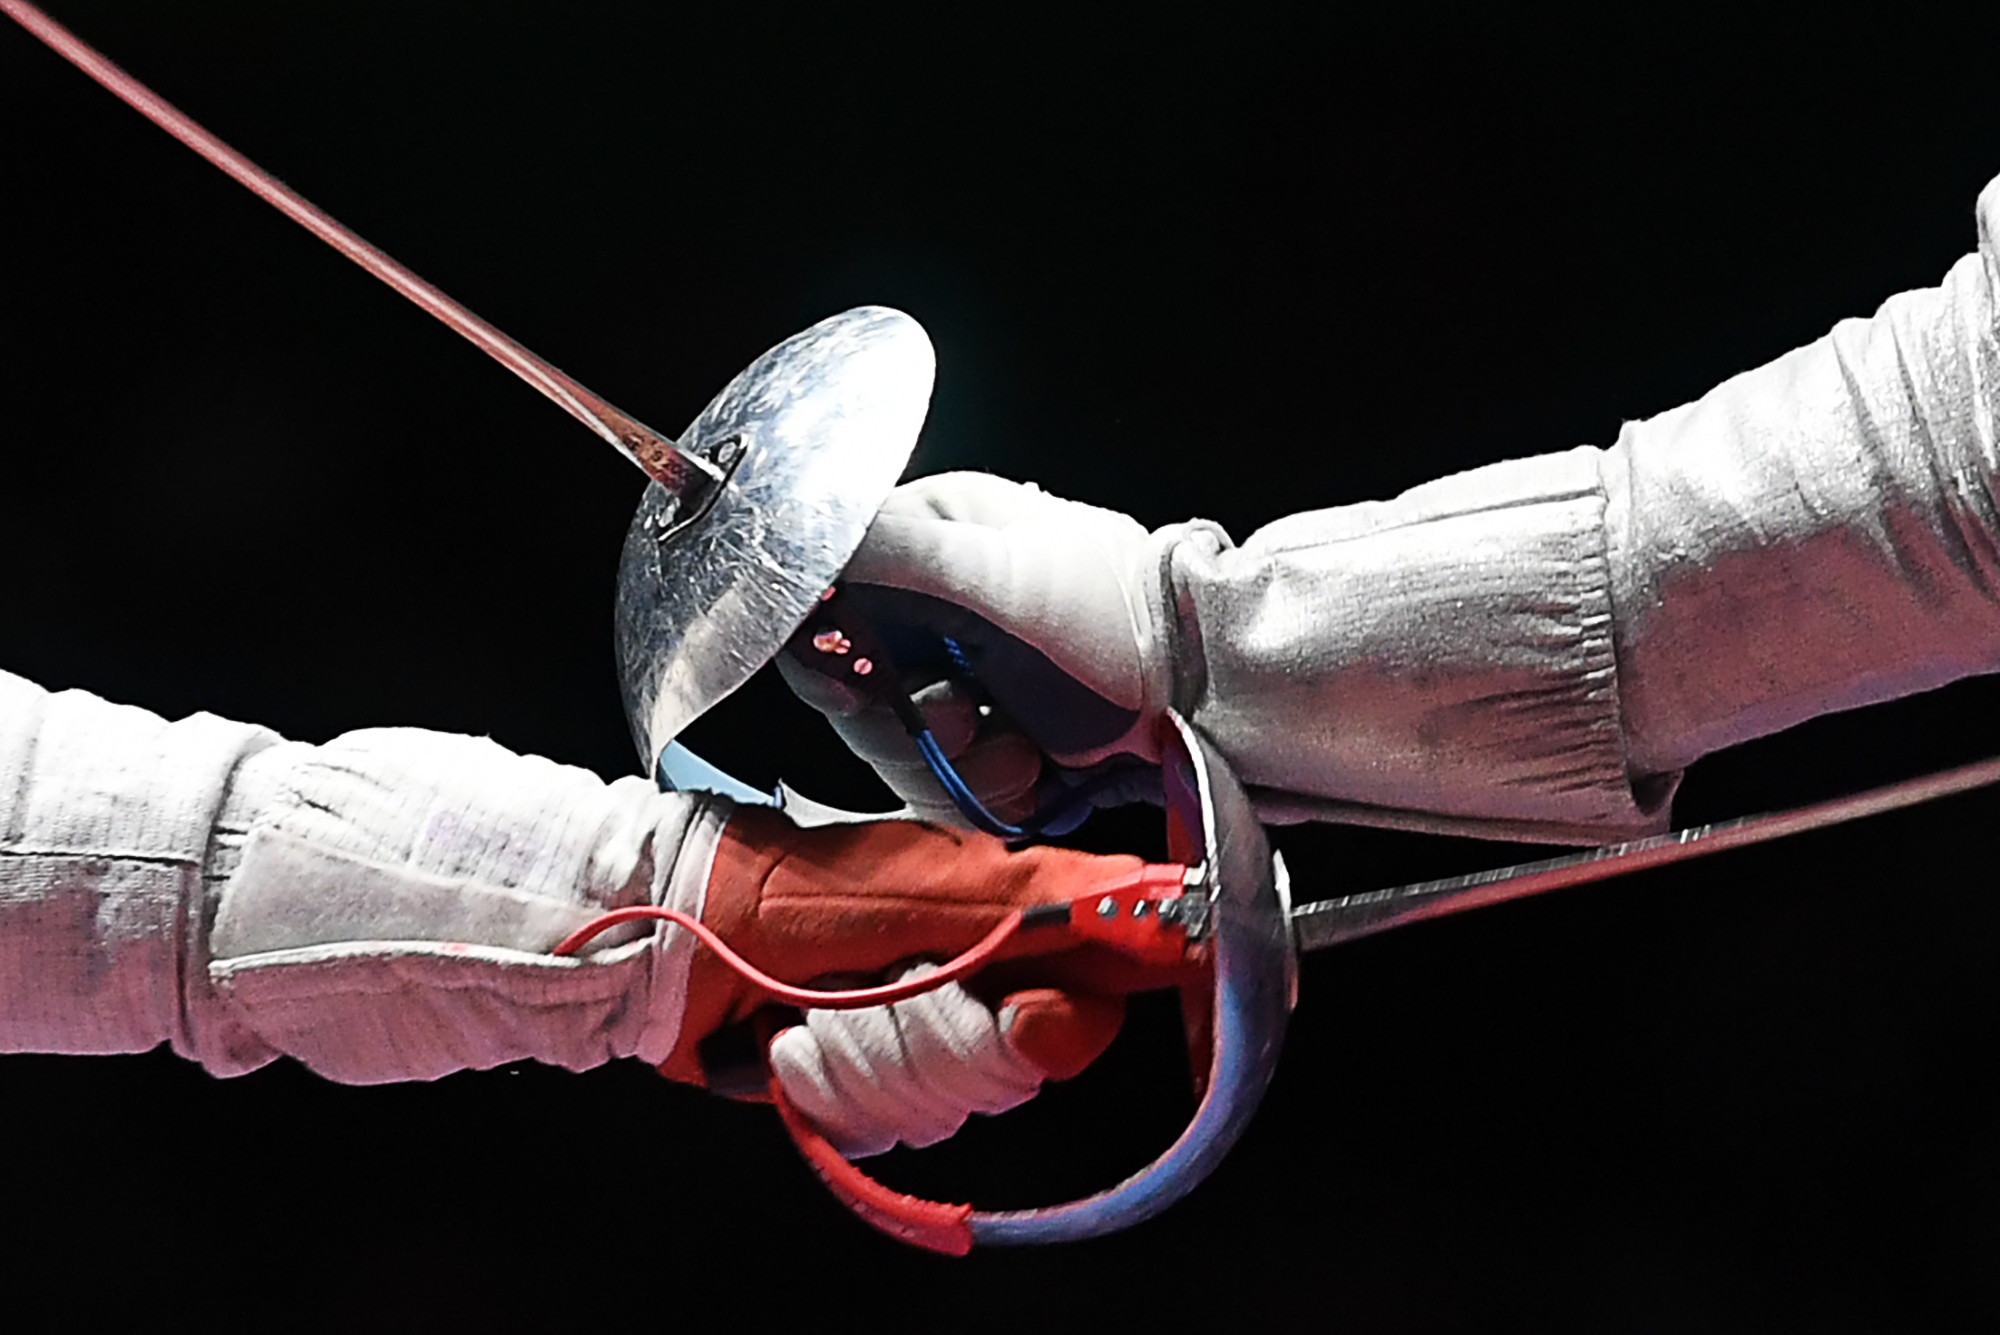 Italy take two golds on last day of European Fencing Championships